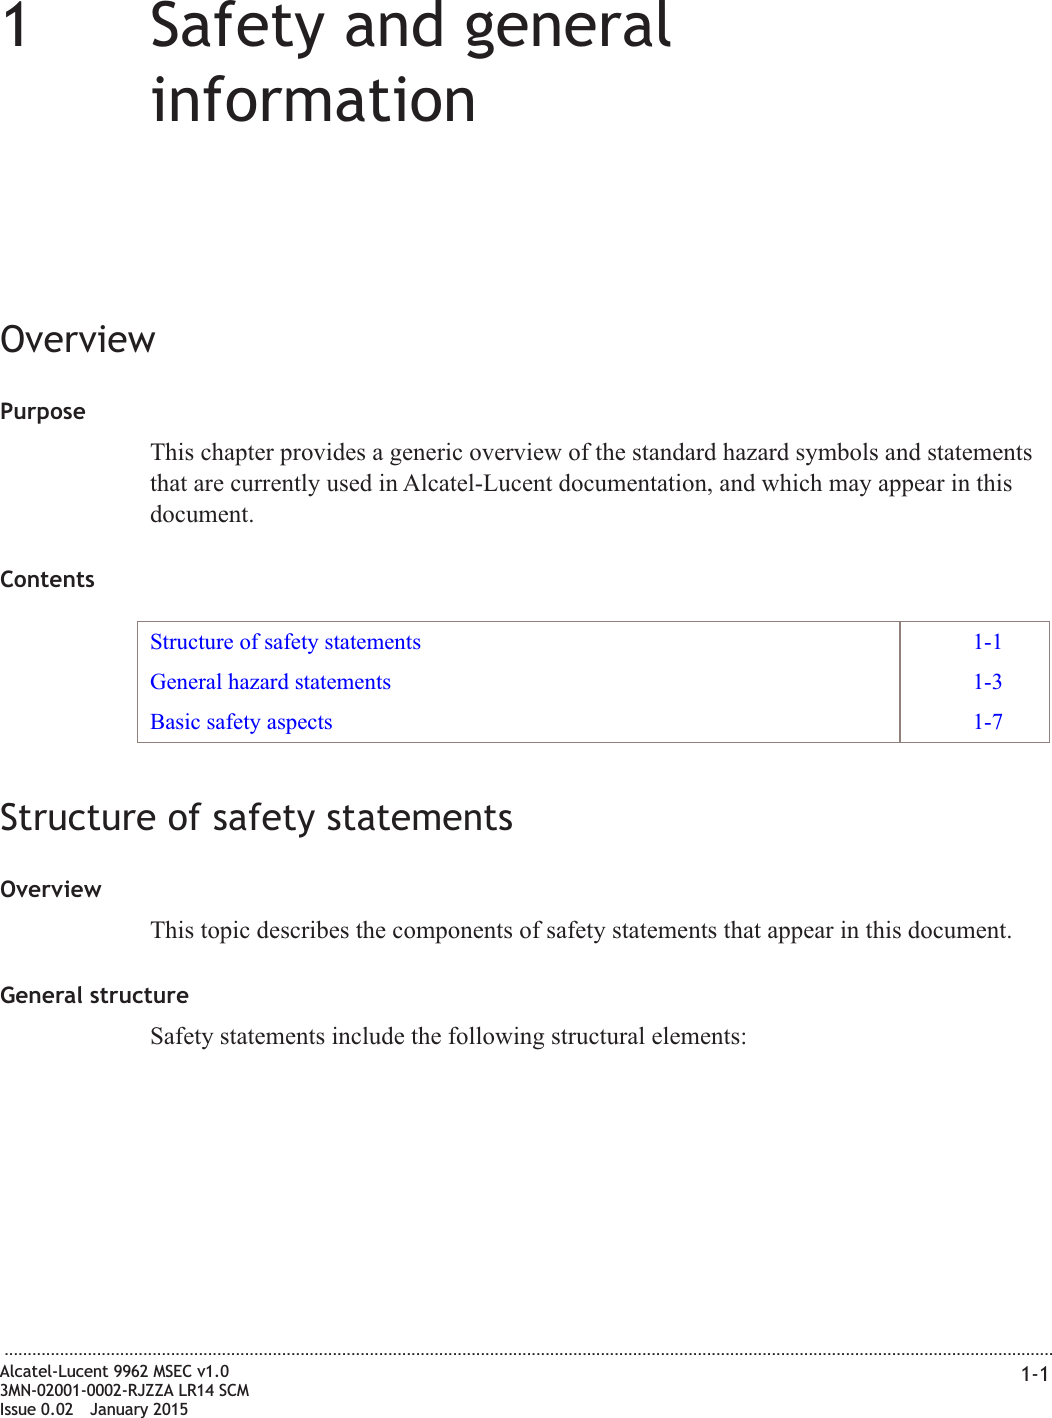 11Safety and generalinformationOverviewPurposeThis chapter provides a generic overview of the standard hazard symbols and statementsthat are currently used in Alcatel-Lucent documentation, and which may appear in thisdocument.ContentsStructure of safety statements 1-1General hazard statements 1-3Basic safety aspects 1-7Structure of safety statementsOverviewThis topic describes the components of safety statements that appear in this document.General structureSafety statements include the following structural elements:...................................................................................................................................................................................................................................Alcatel-Lucent 9962 MSEC v1.03MN-02001-0002-RJZZA LR14 SCMIssue 0.02 January 20151-1DRAFTDRAFT